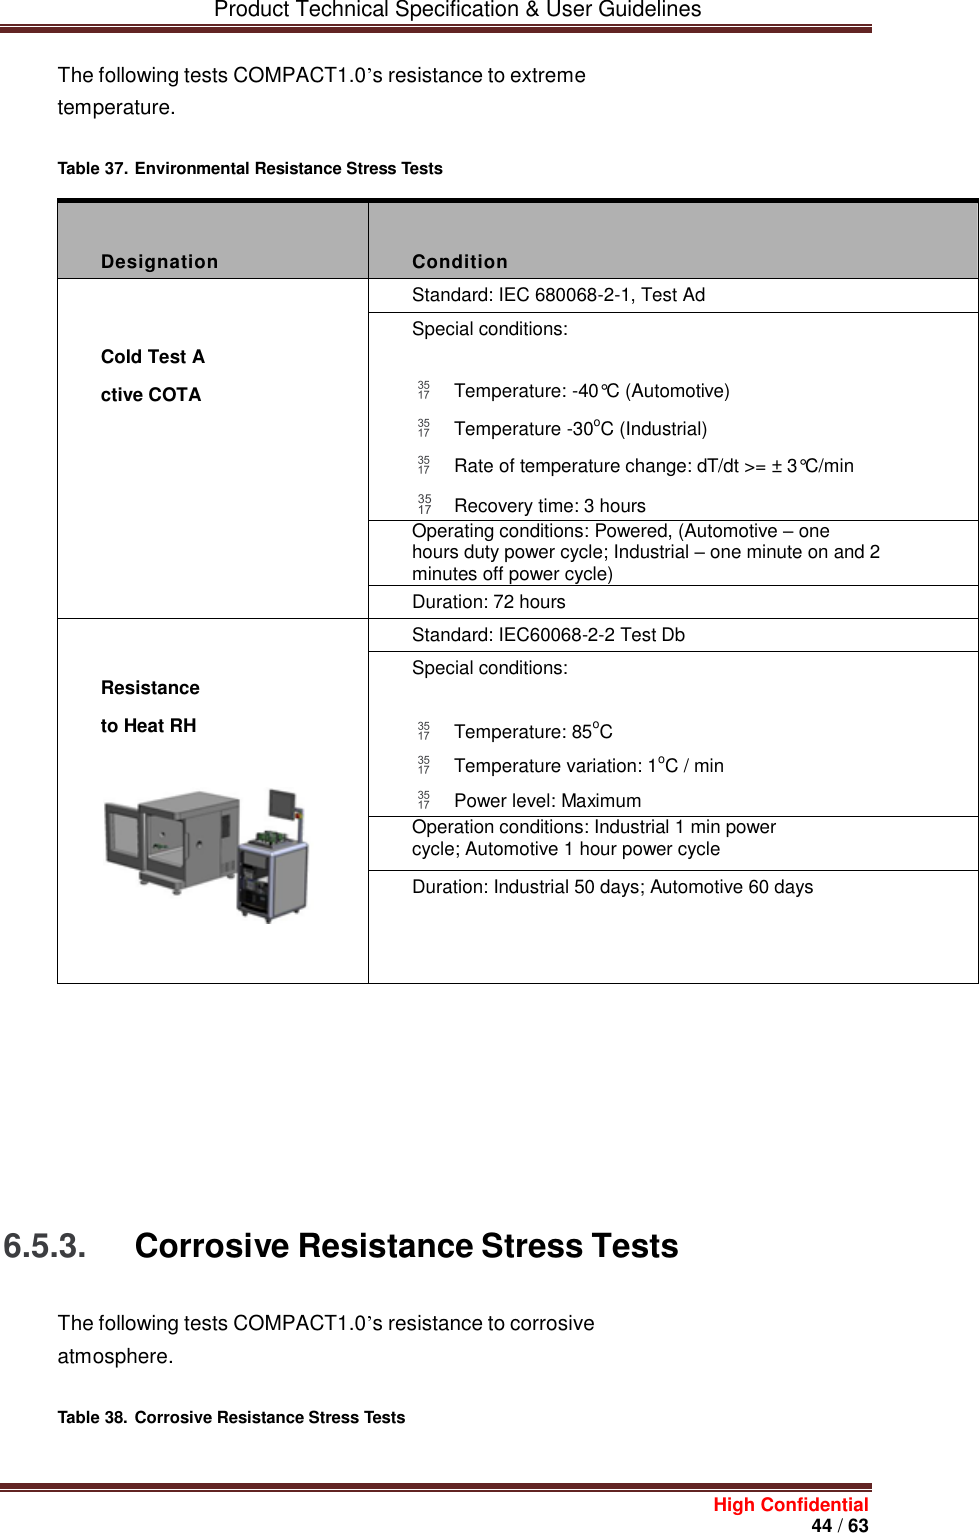         Product Technical Specification &amp; User Guidelines     High Confidential       44 / 63  The following tests COMPACT1.0’s resistance to extreme temperature. Table 37. Environmental Resistance Stress Tests    Designation  Condition  Cold Test Active COTA Standard: IEC 680068-2-1, Test Ad Special conditions:  Temperature: -40°C (Automotive)  Temperature -30oC (Industrial)  Rate of temperature change: dT/dt &gt;= ± 3°C/min  Recovery time: 3 hours Operating conditions: Powered, (Automotive – one hours duty power cycle; Industrial – one minute on and 2 minutes off power cycle) Duration: 72 hours  Resistance to Heat RH   Standard: IEC60068-2-2 Test Db Special conditions:  Temperature: 85oC  Temperature variation: 1oC / min  Power level: Maximum Operation conditions: Industrial 1 min power cycle; Automotive 1 hour power cycle Duration: Industrial 50 days; Automotive 60 days              6.5.3. Corrosive Resistance Stress Tests The following tests COMPACT1.0’s resistance to corrosive atmosphere. Table 38. Corrosive Resistance Stress Tests   